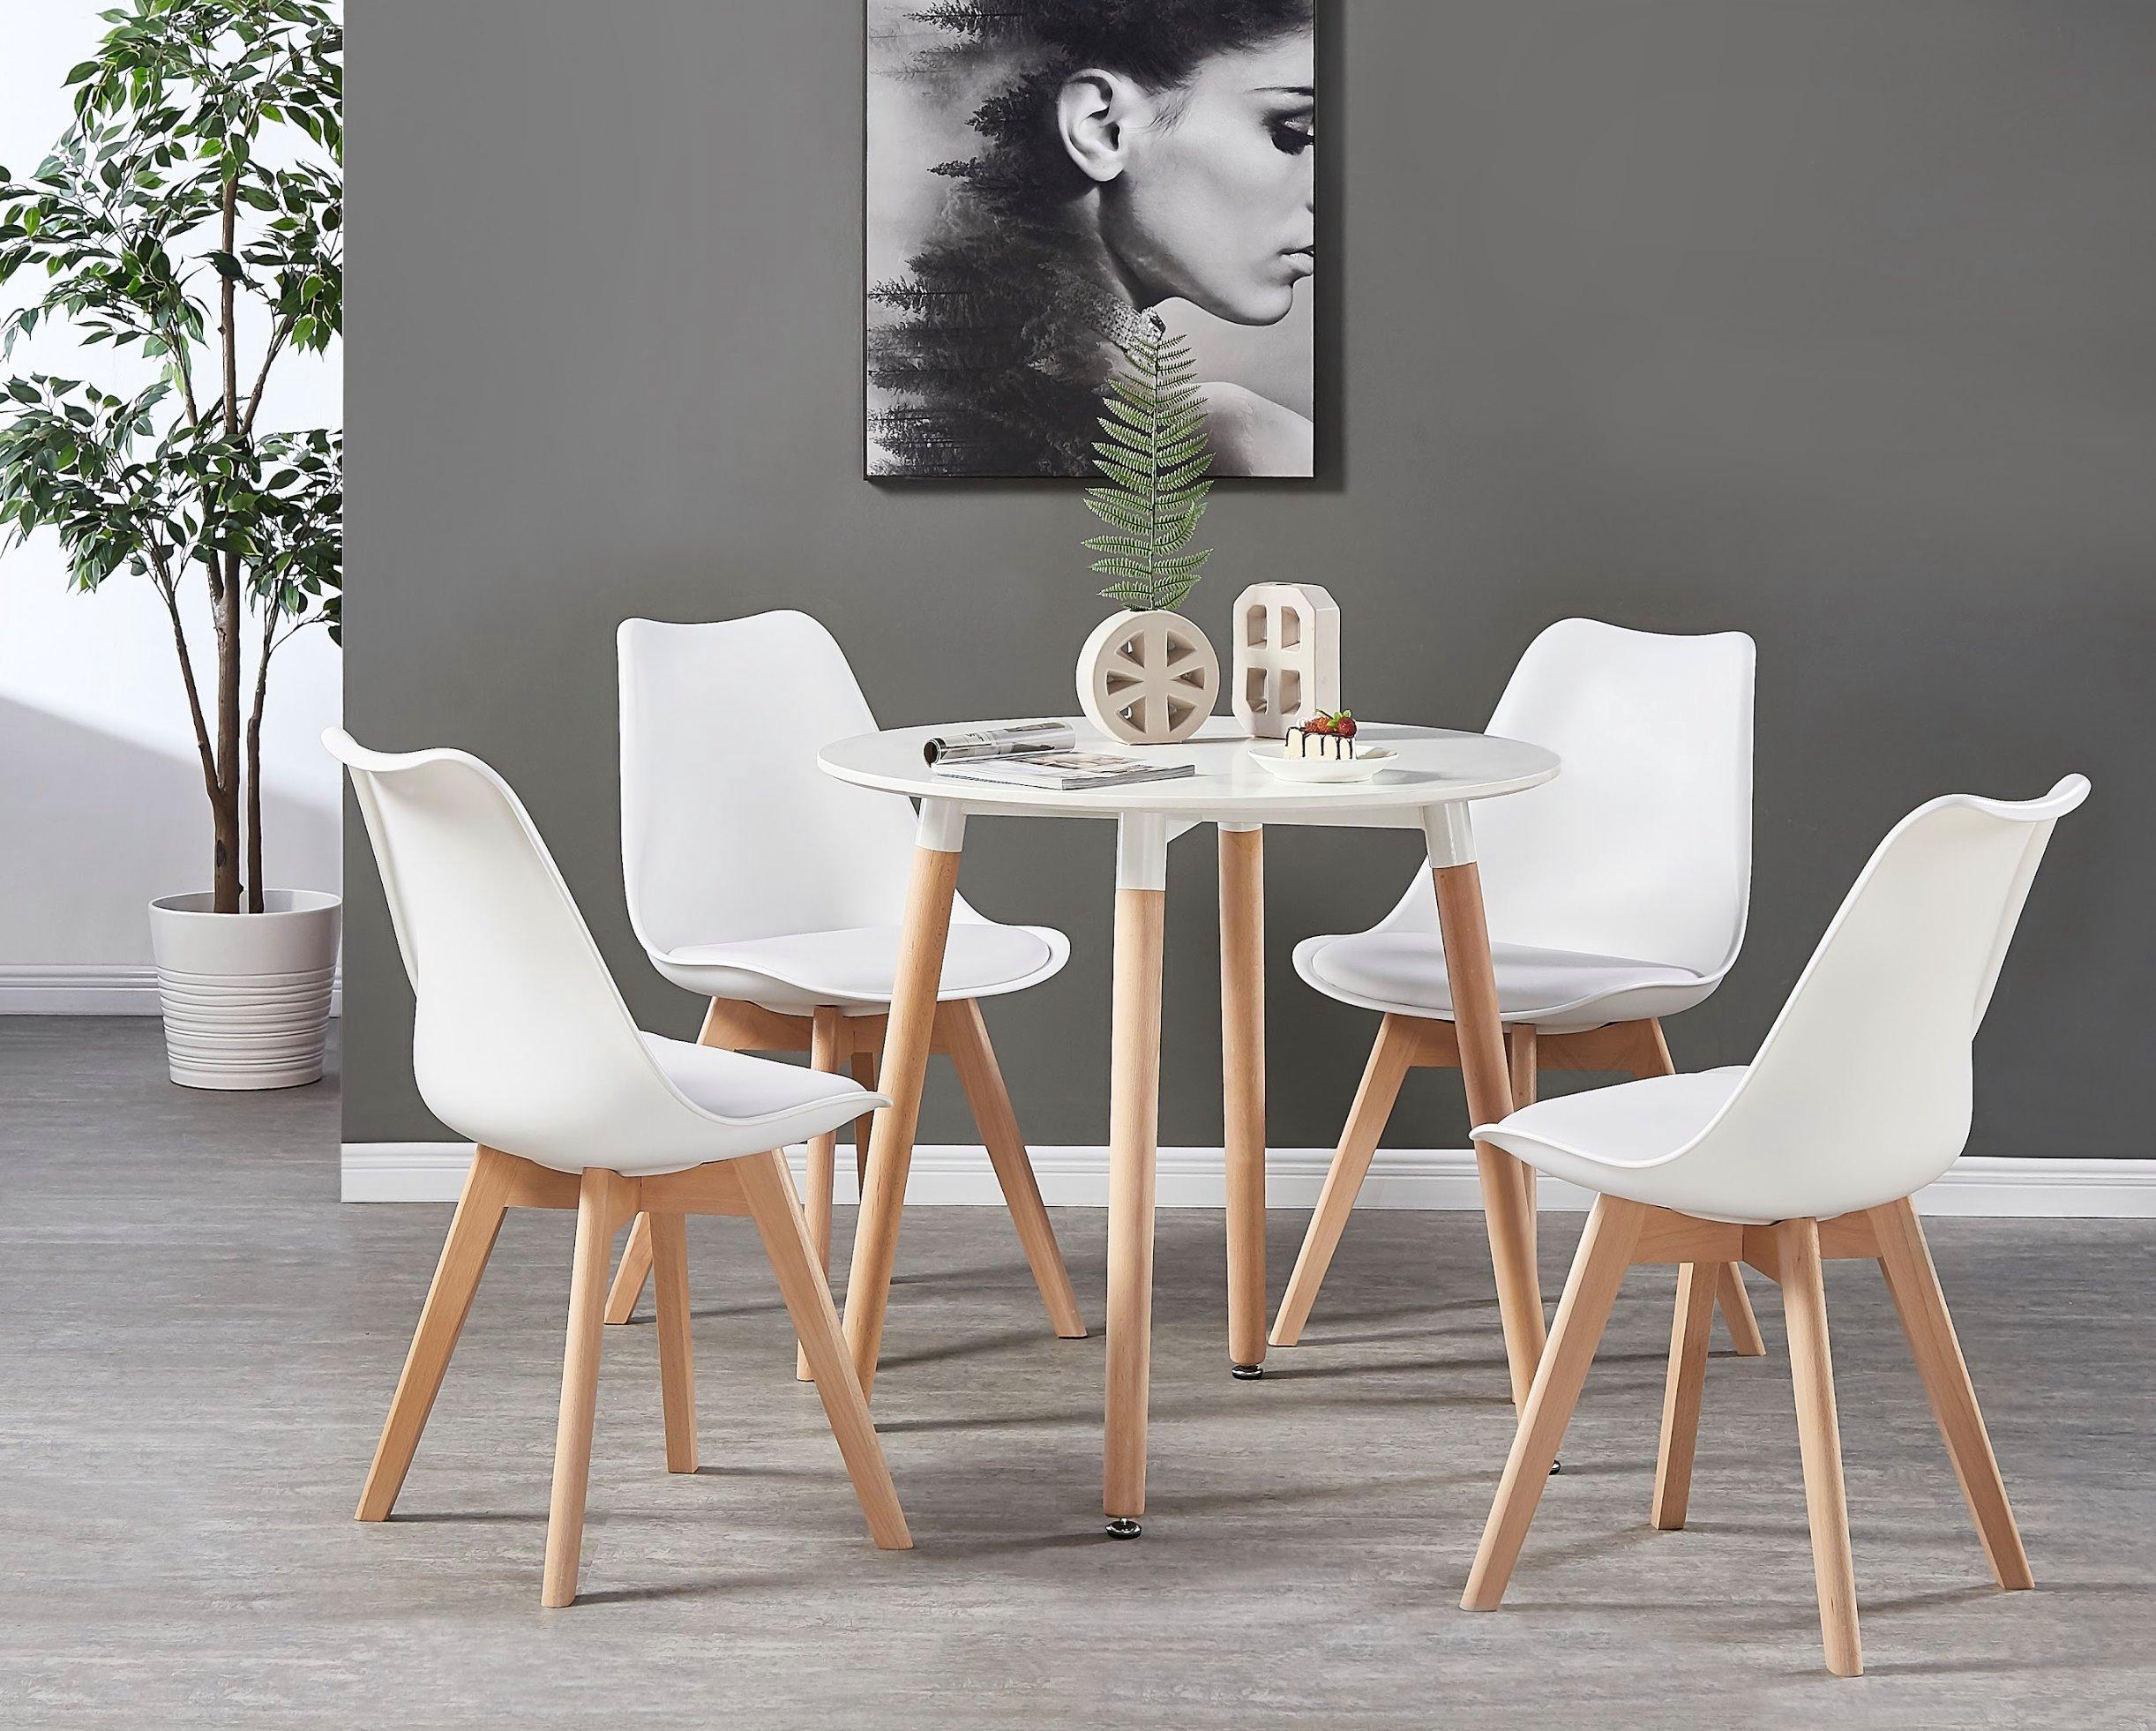 5PCs Dining Set - a Round Dining Table & Set of 4 Lorenzo Tulip chairs with Padded Seat